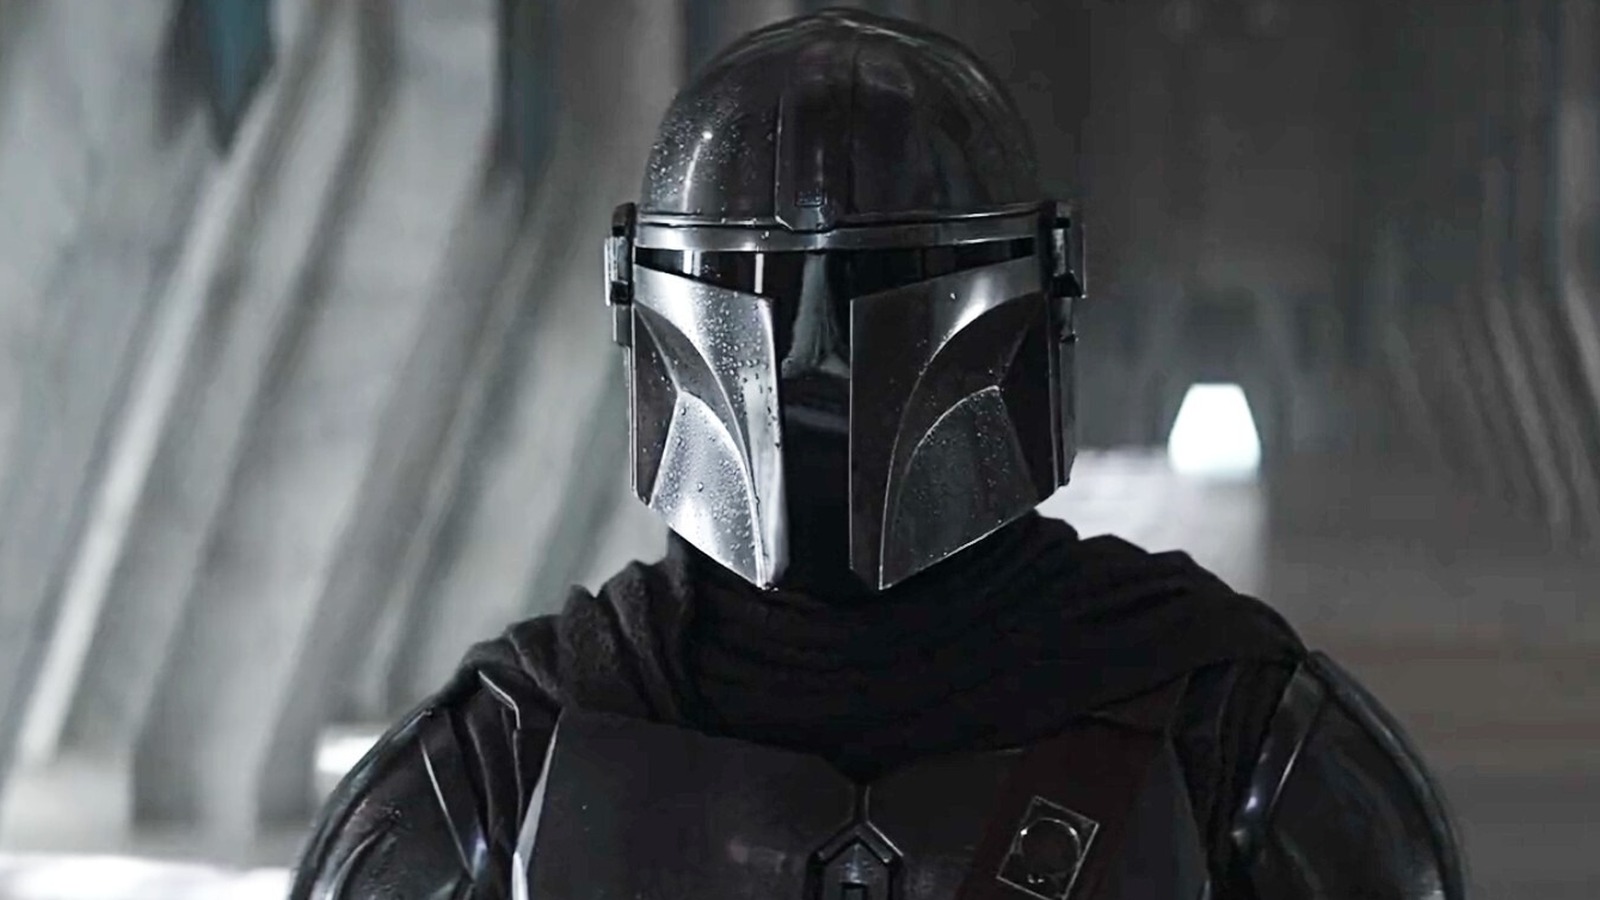 The Mandalorian Season 3 Review: This Is The Way!